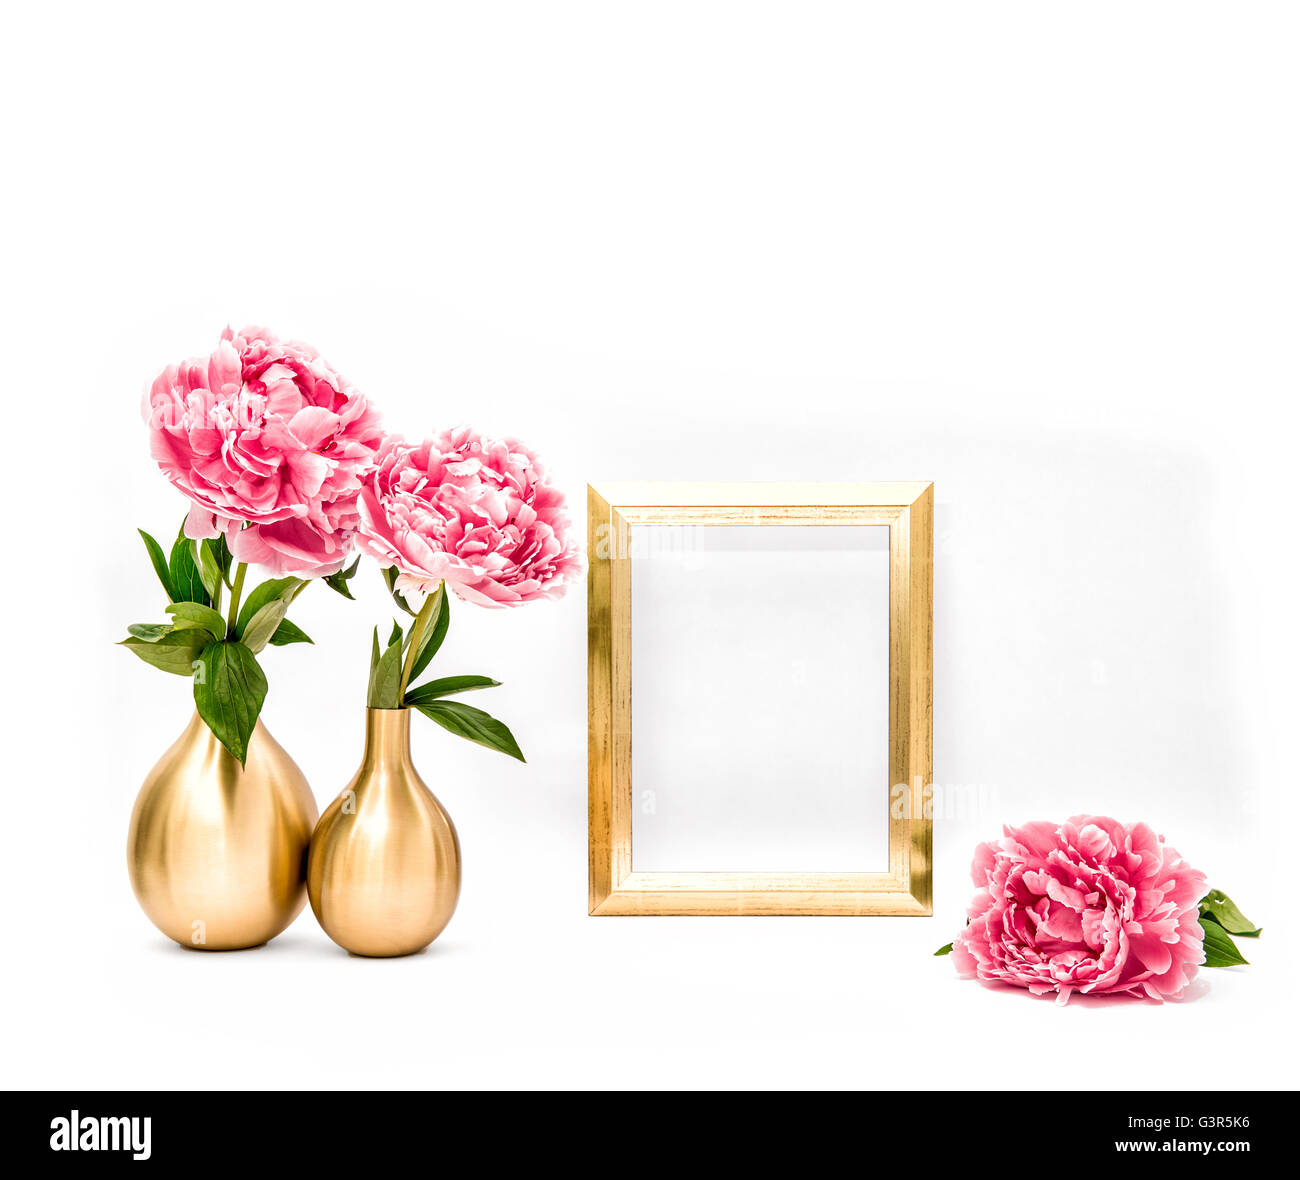 Golden picture frame and pink flowers. Minimal style decoration with space for your image text work Stock Photo